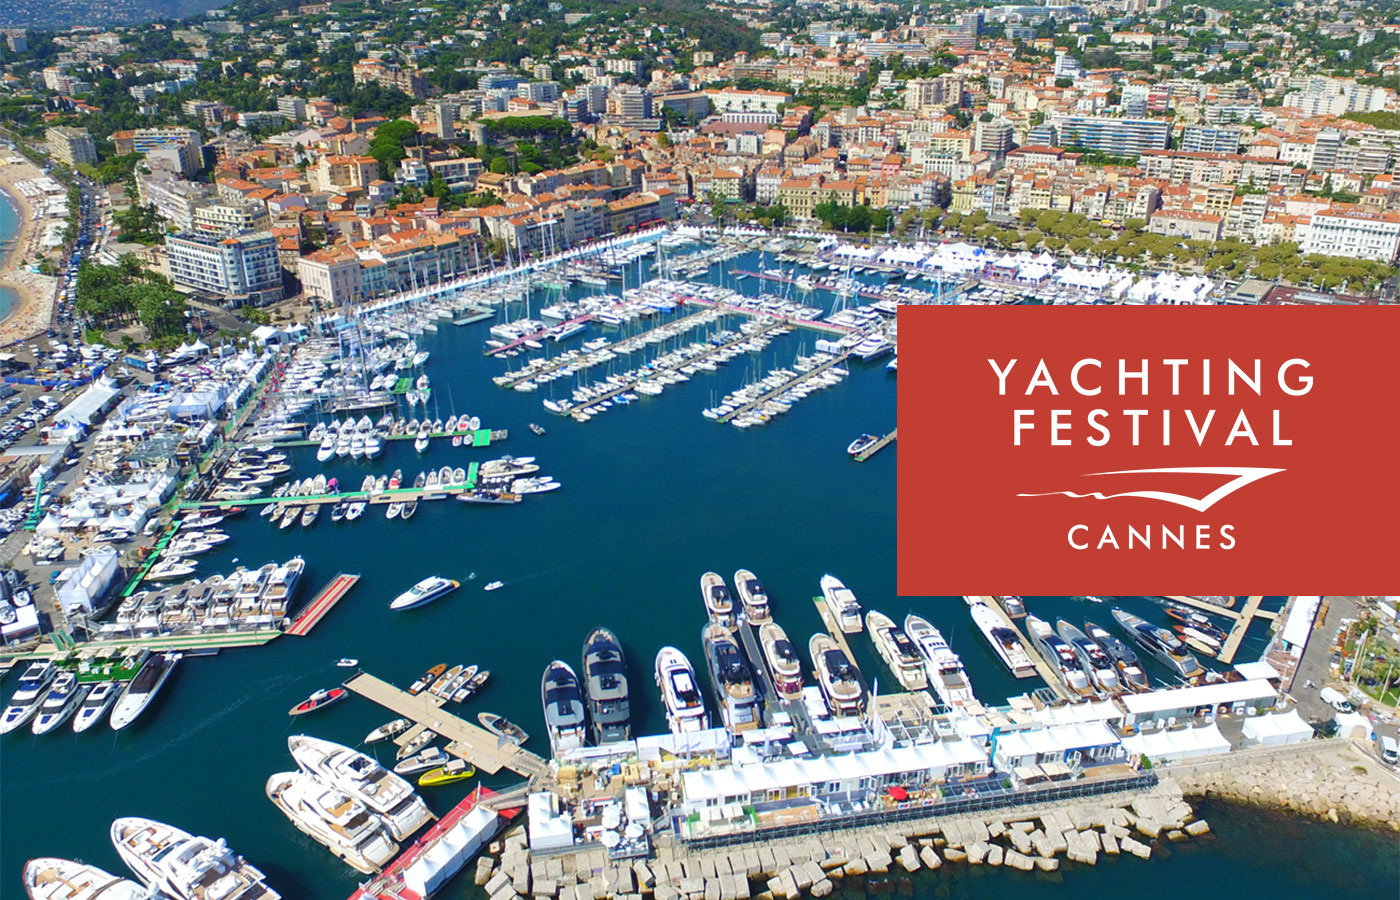 2019 Cannes Yachting Festival [Boat Show Guide]